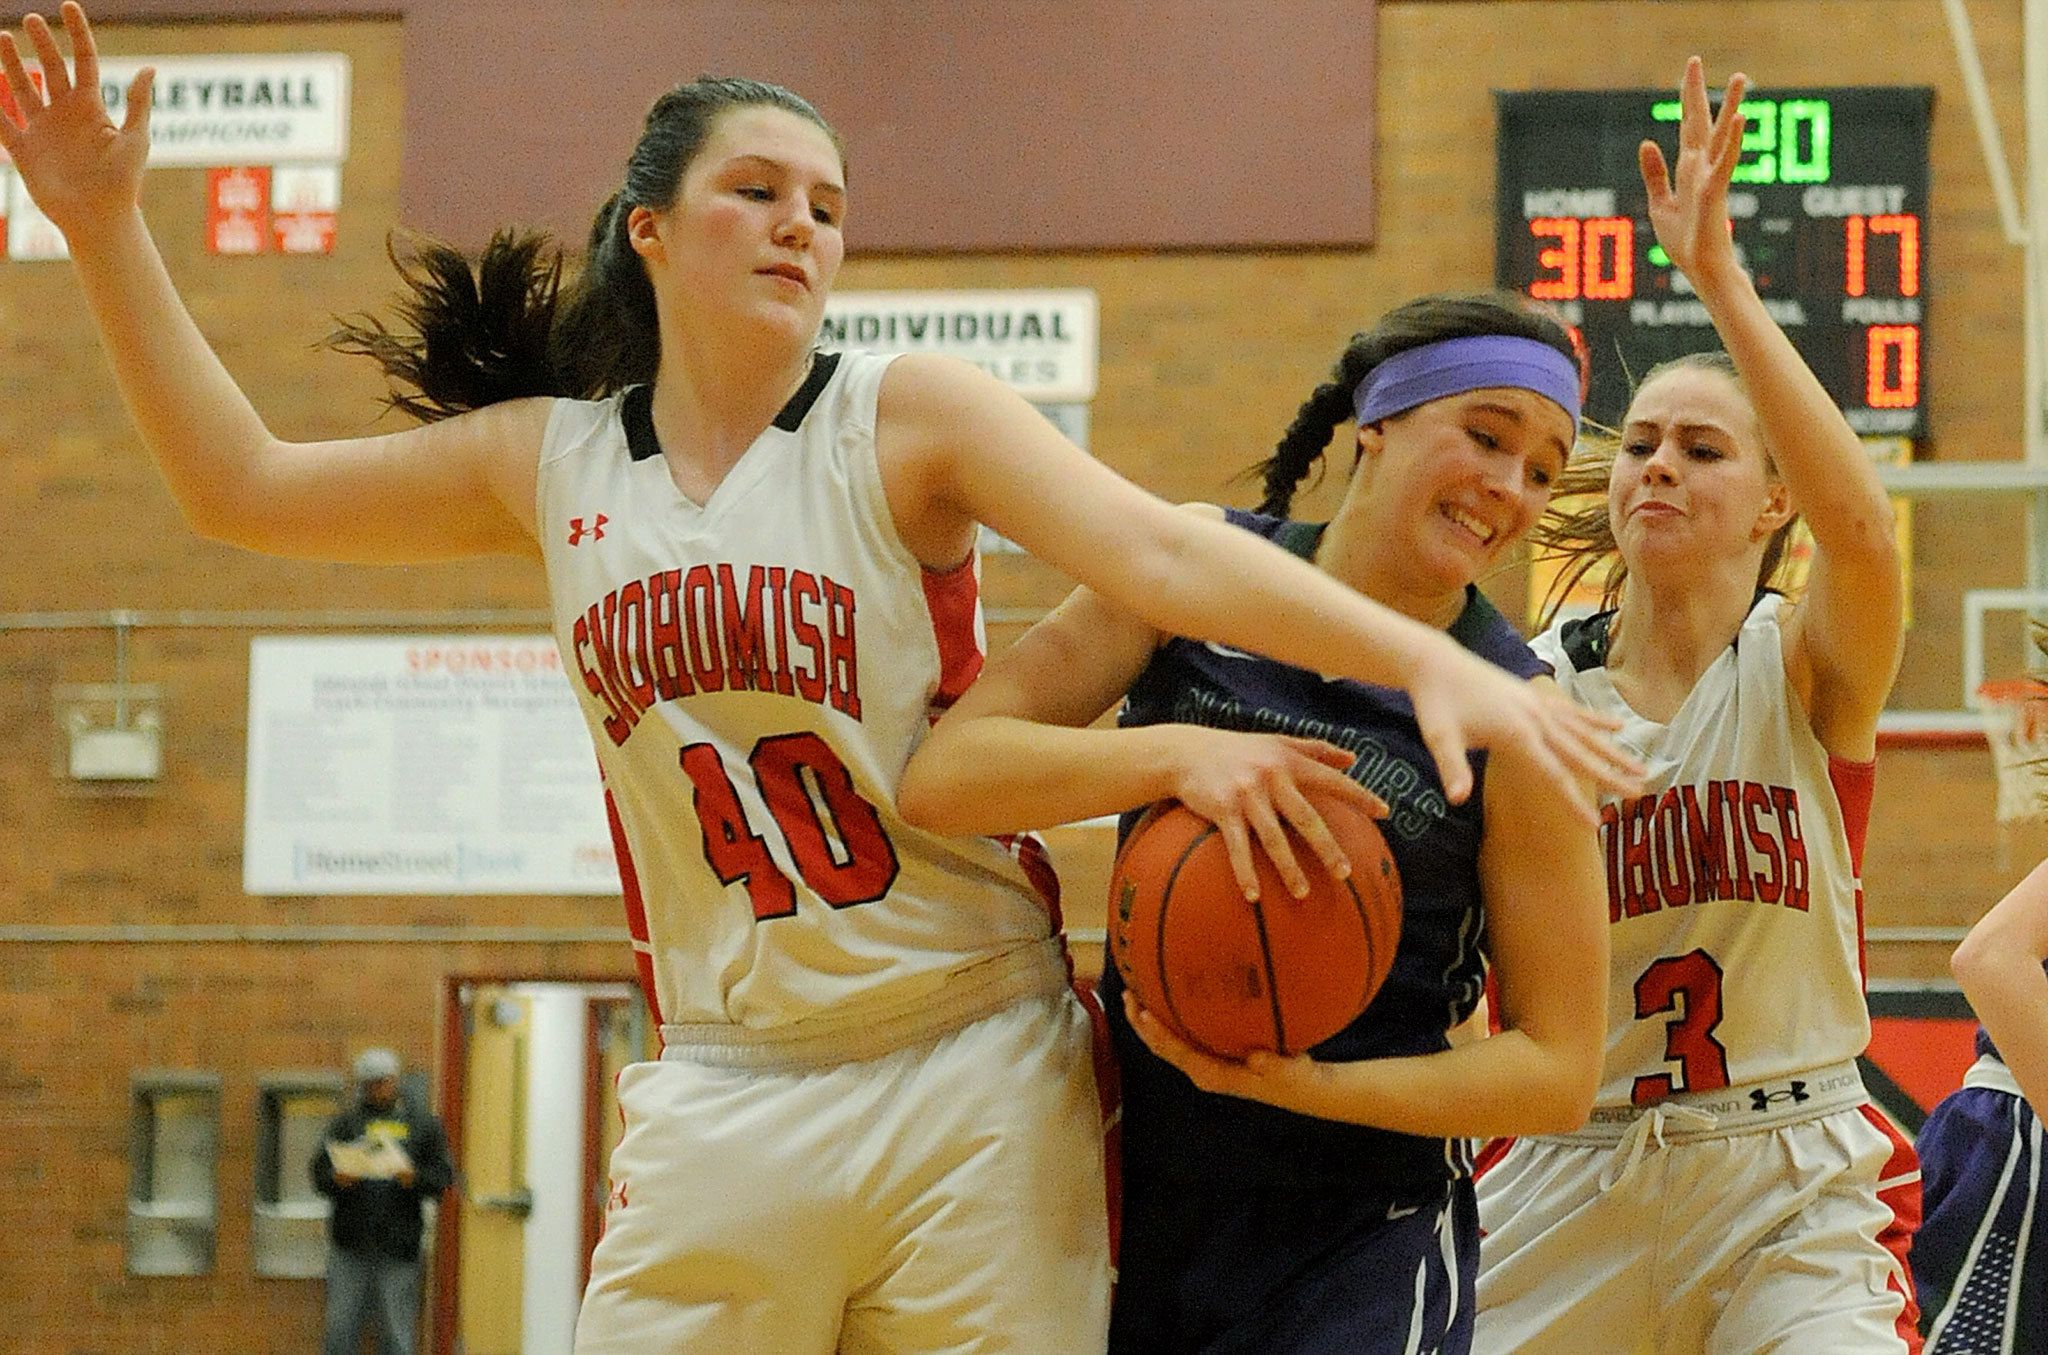 Edmonds-Woodway’s Kendra Cooper (center) wrestles for a rebound with Snohomish’s Courtney Perry (left) and Katie Brandvold during second-half action Tuesday in a 3A District semifinal game at Mountlake Terrace High School. (Doug Ramsay / For The Herald)